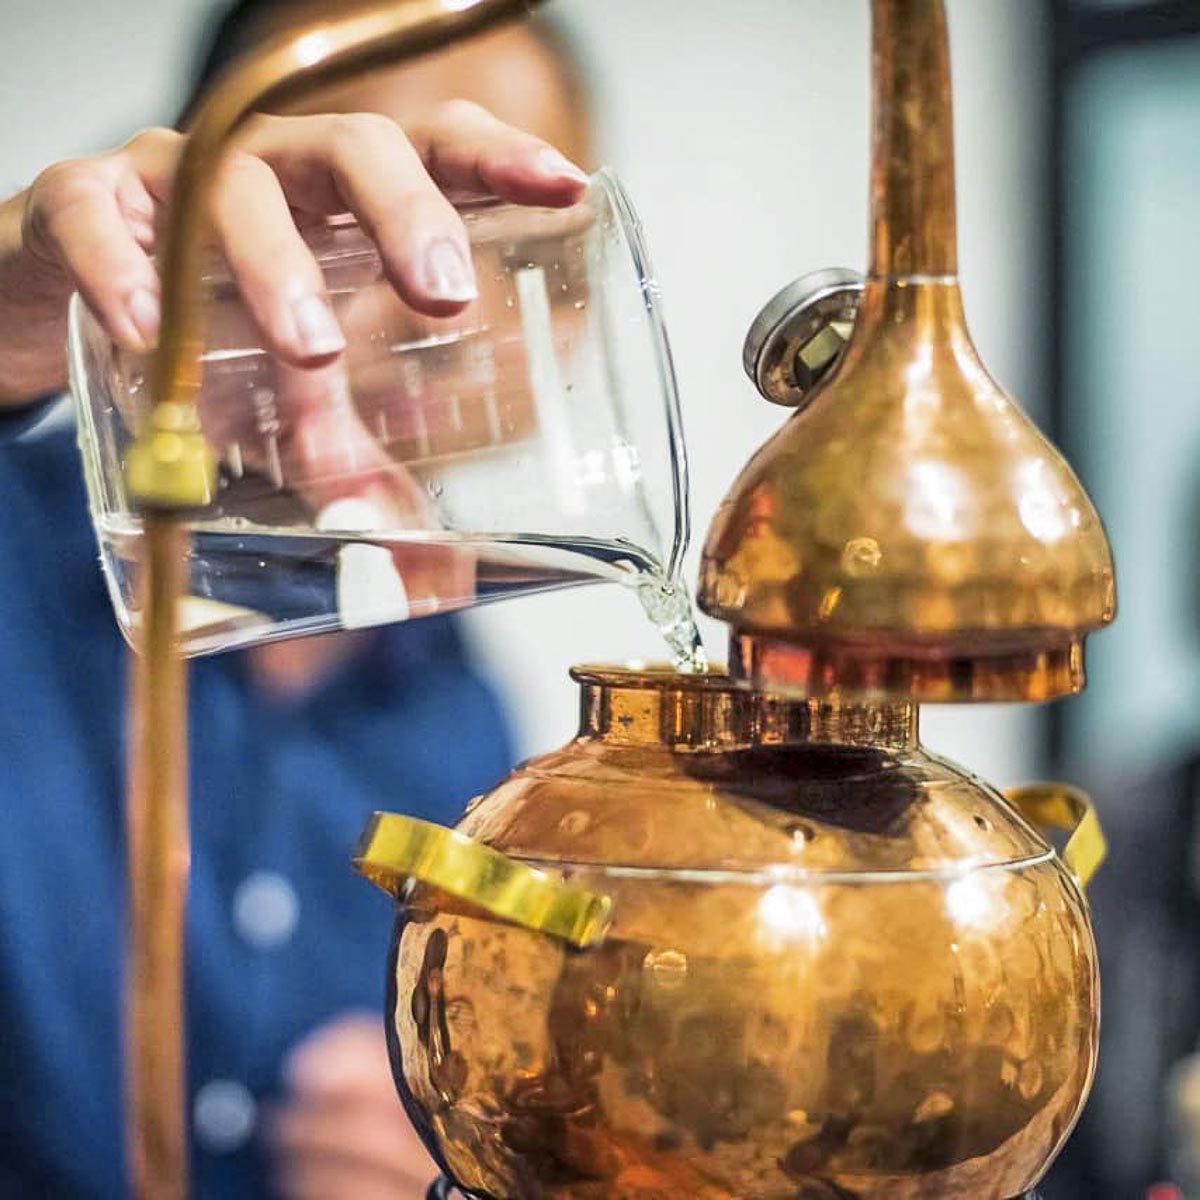 Gin-Making Class at Brass Lion Distillery - Staycation in Singapore